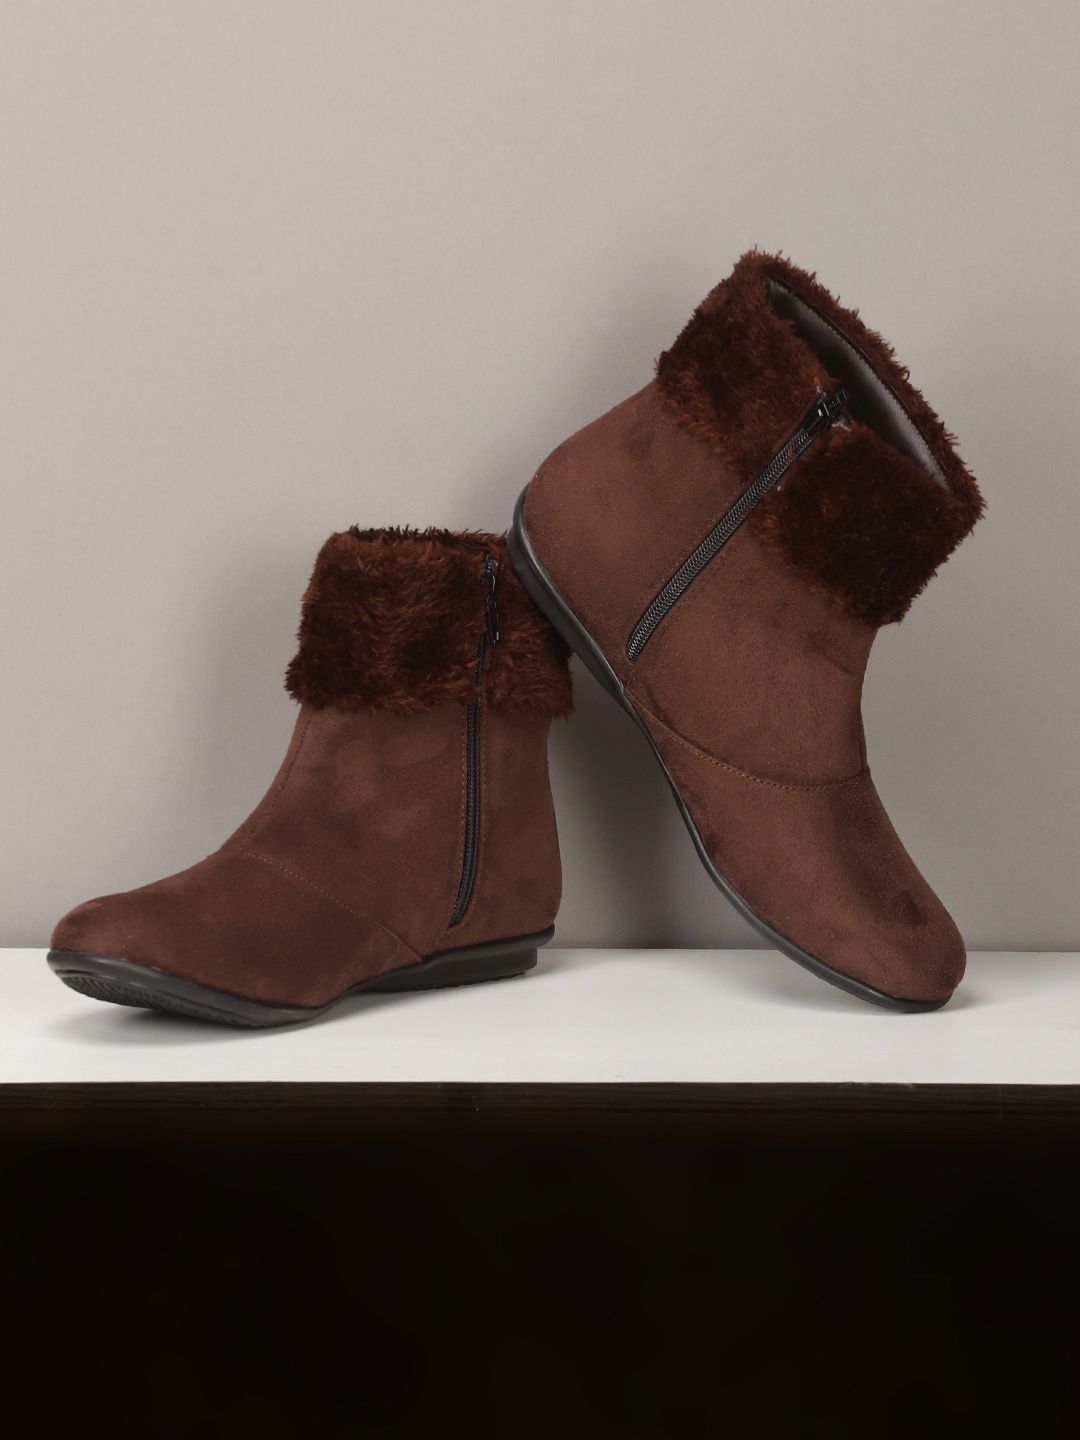 Monrow Women Brown Suede Faux Fur Trim Winter Boots Price in India